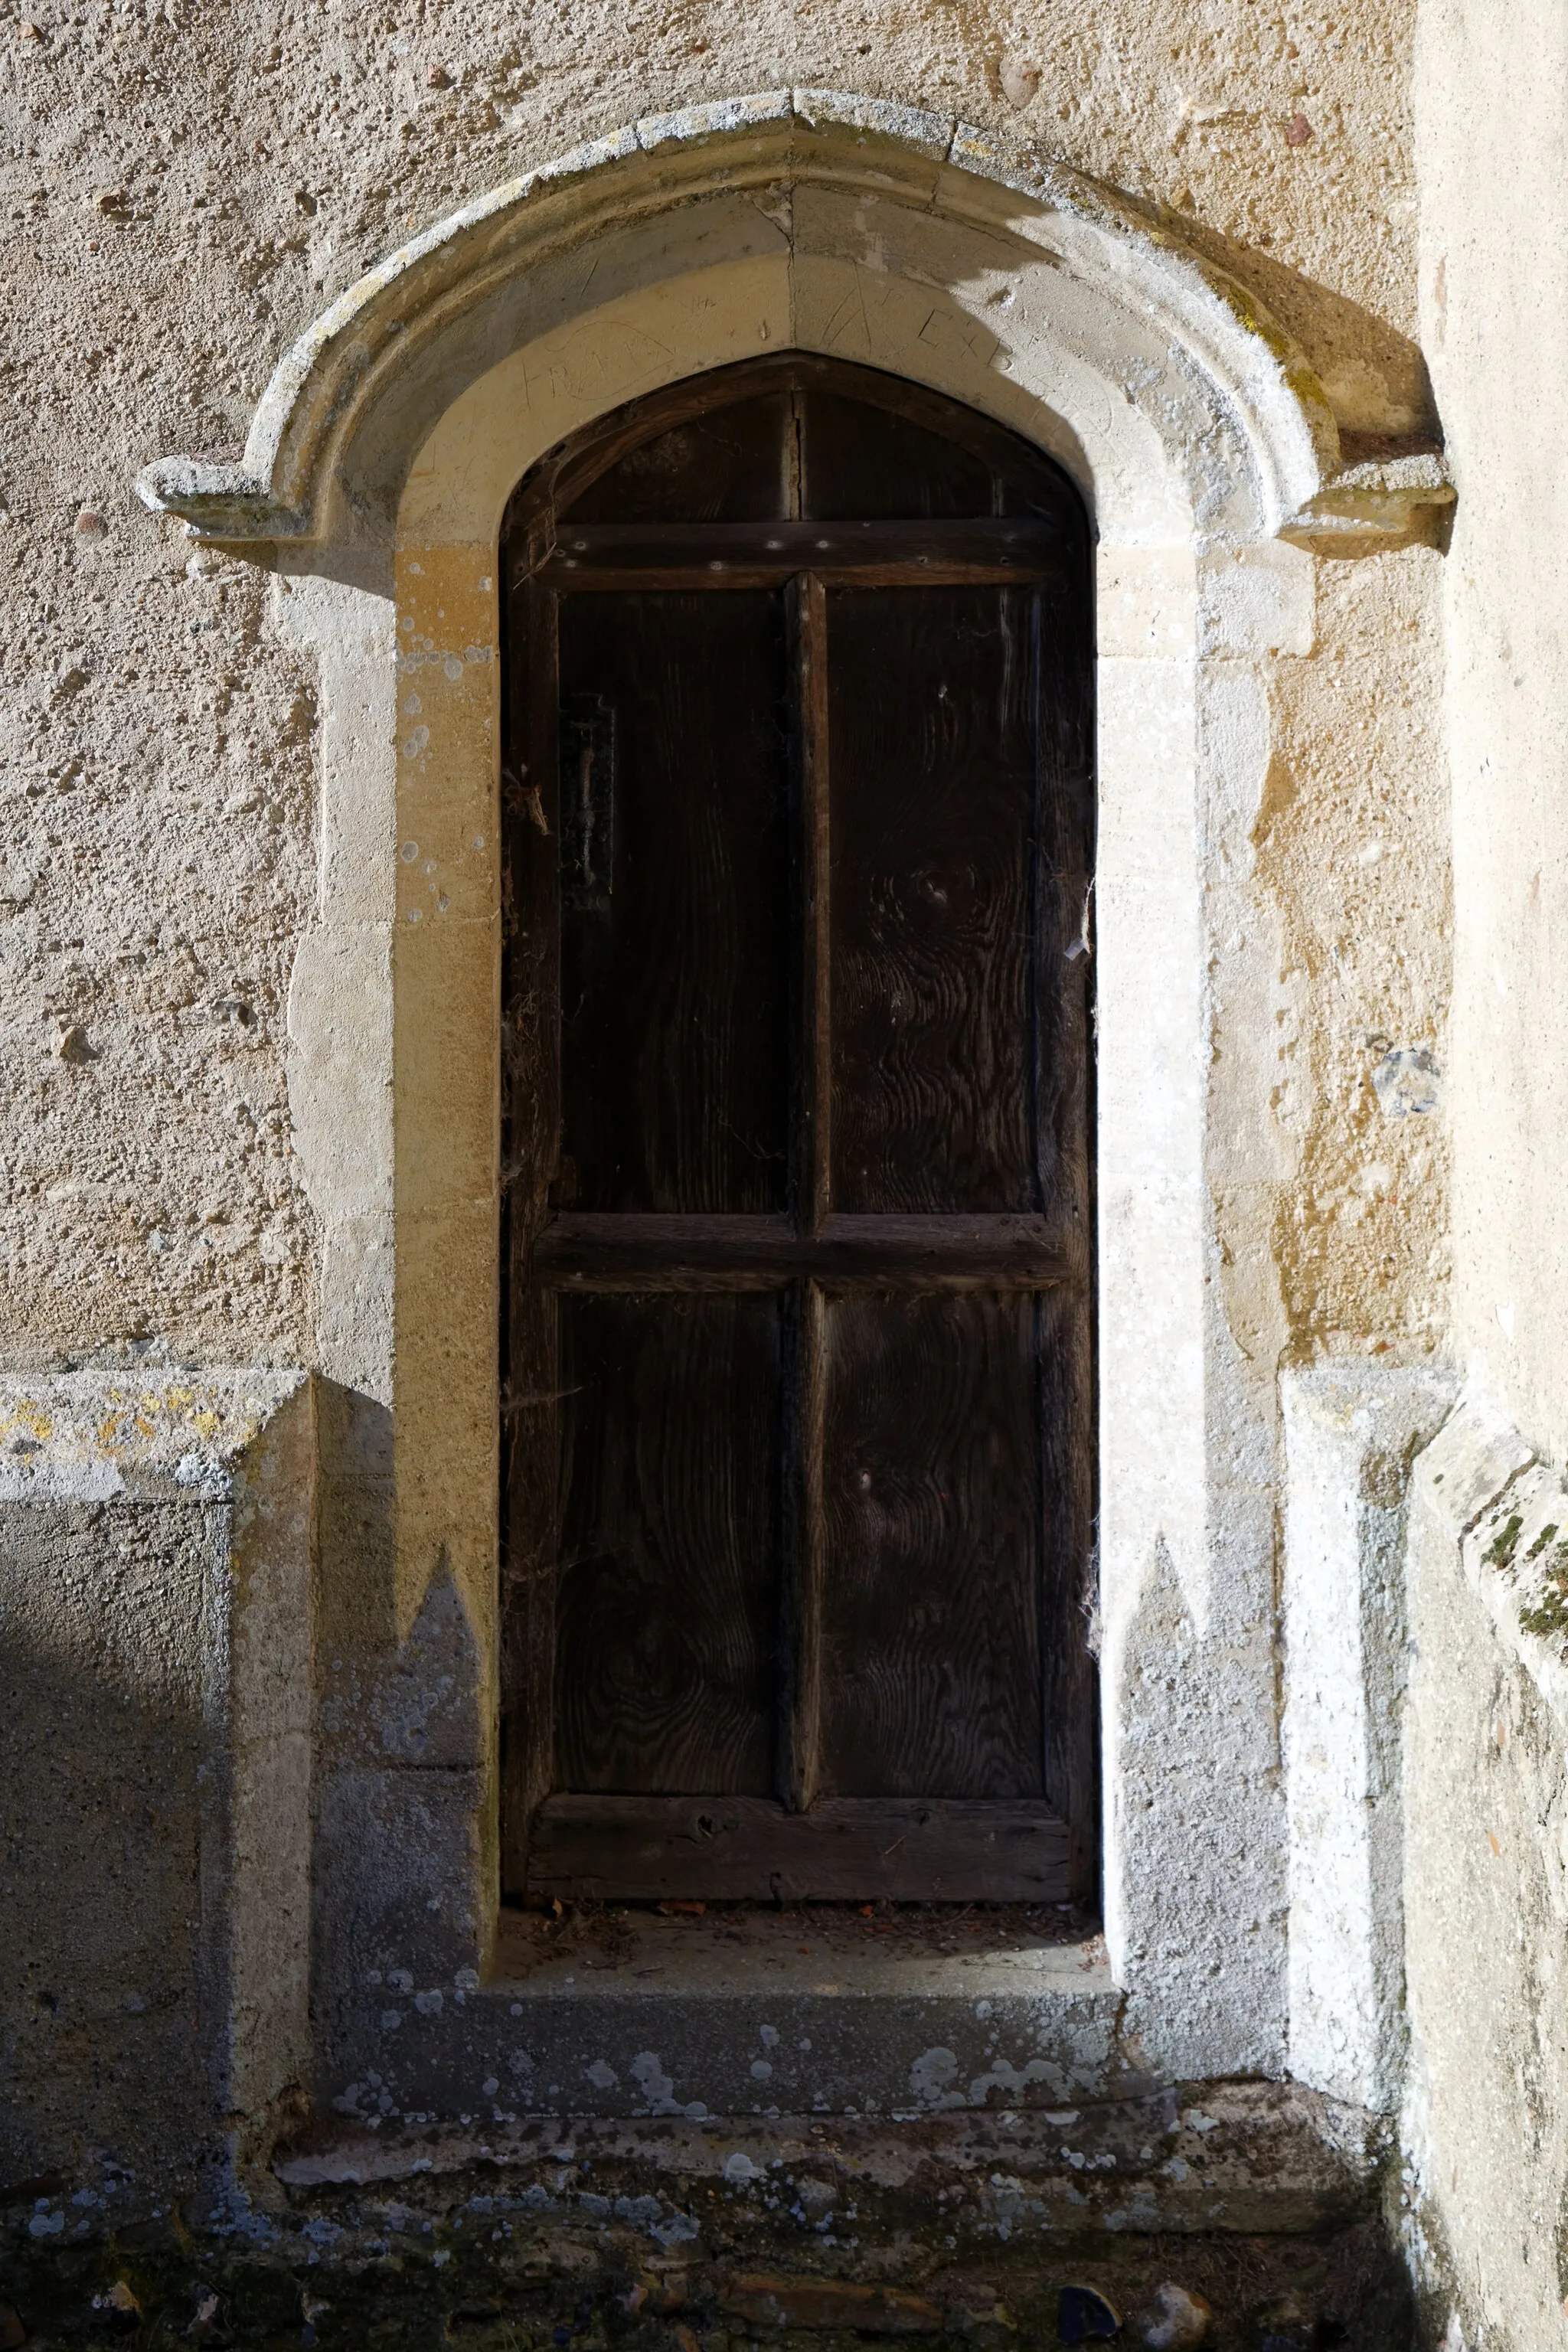 Photo showing: An external view of the early 16th-century south door of the chancel of the Church of St Peter and St Thomas Becket, on Church Road in Stambourne, Essex, England. Camera: Canon EOS 6D with Canon EF 24-105mm F4L IS USM lens. Software: RAW file lens-corrected and optimized with DxO OpticsPro 11 Elite and Viewpoint 2, and further optimized with Adobe Photoshop CS2.